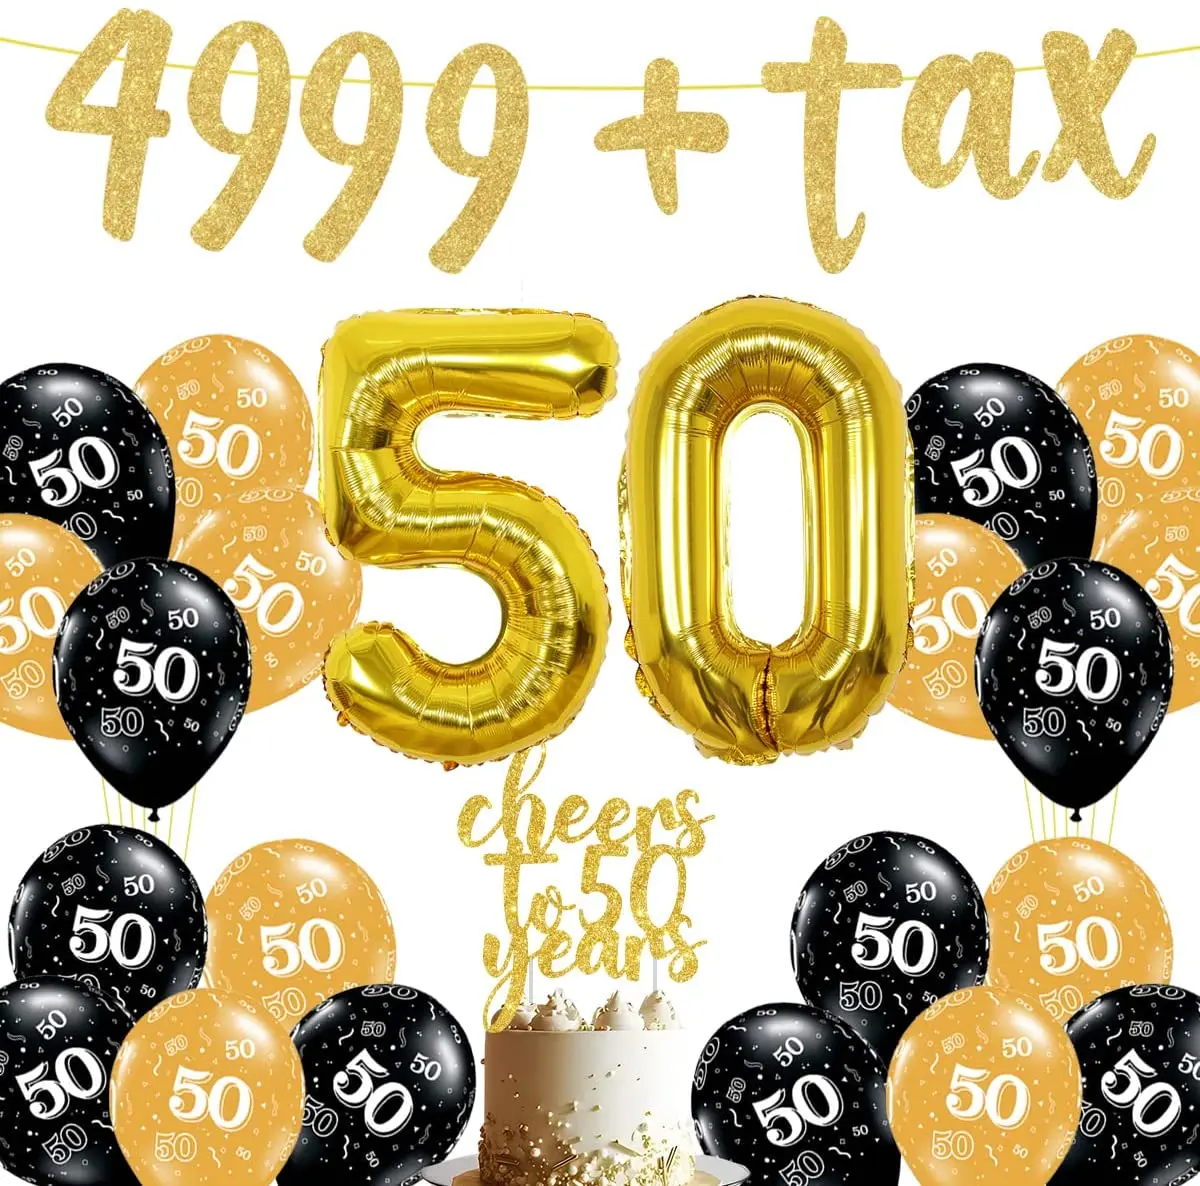 

50th Birthday Decorations Black Gold for Men Women 4999 Plus Tax Banner Cheers To 50 Years Cake Topper 50th Birthday Balloons